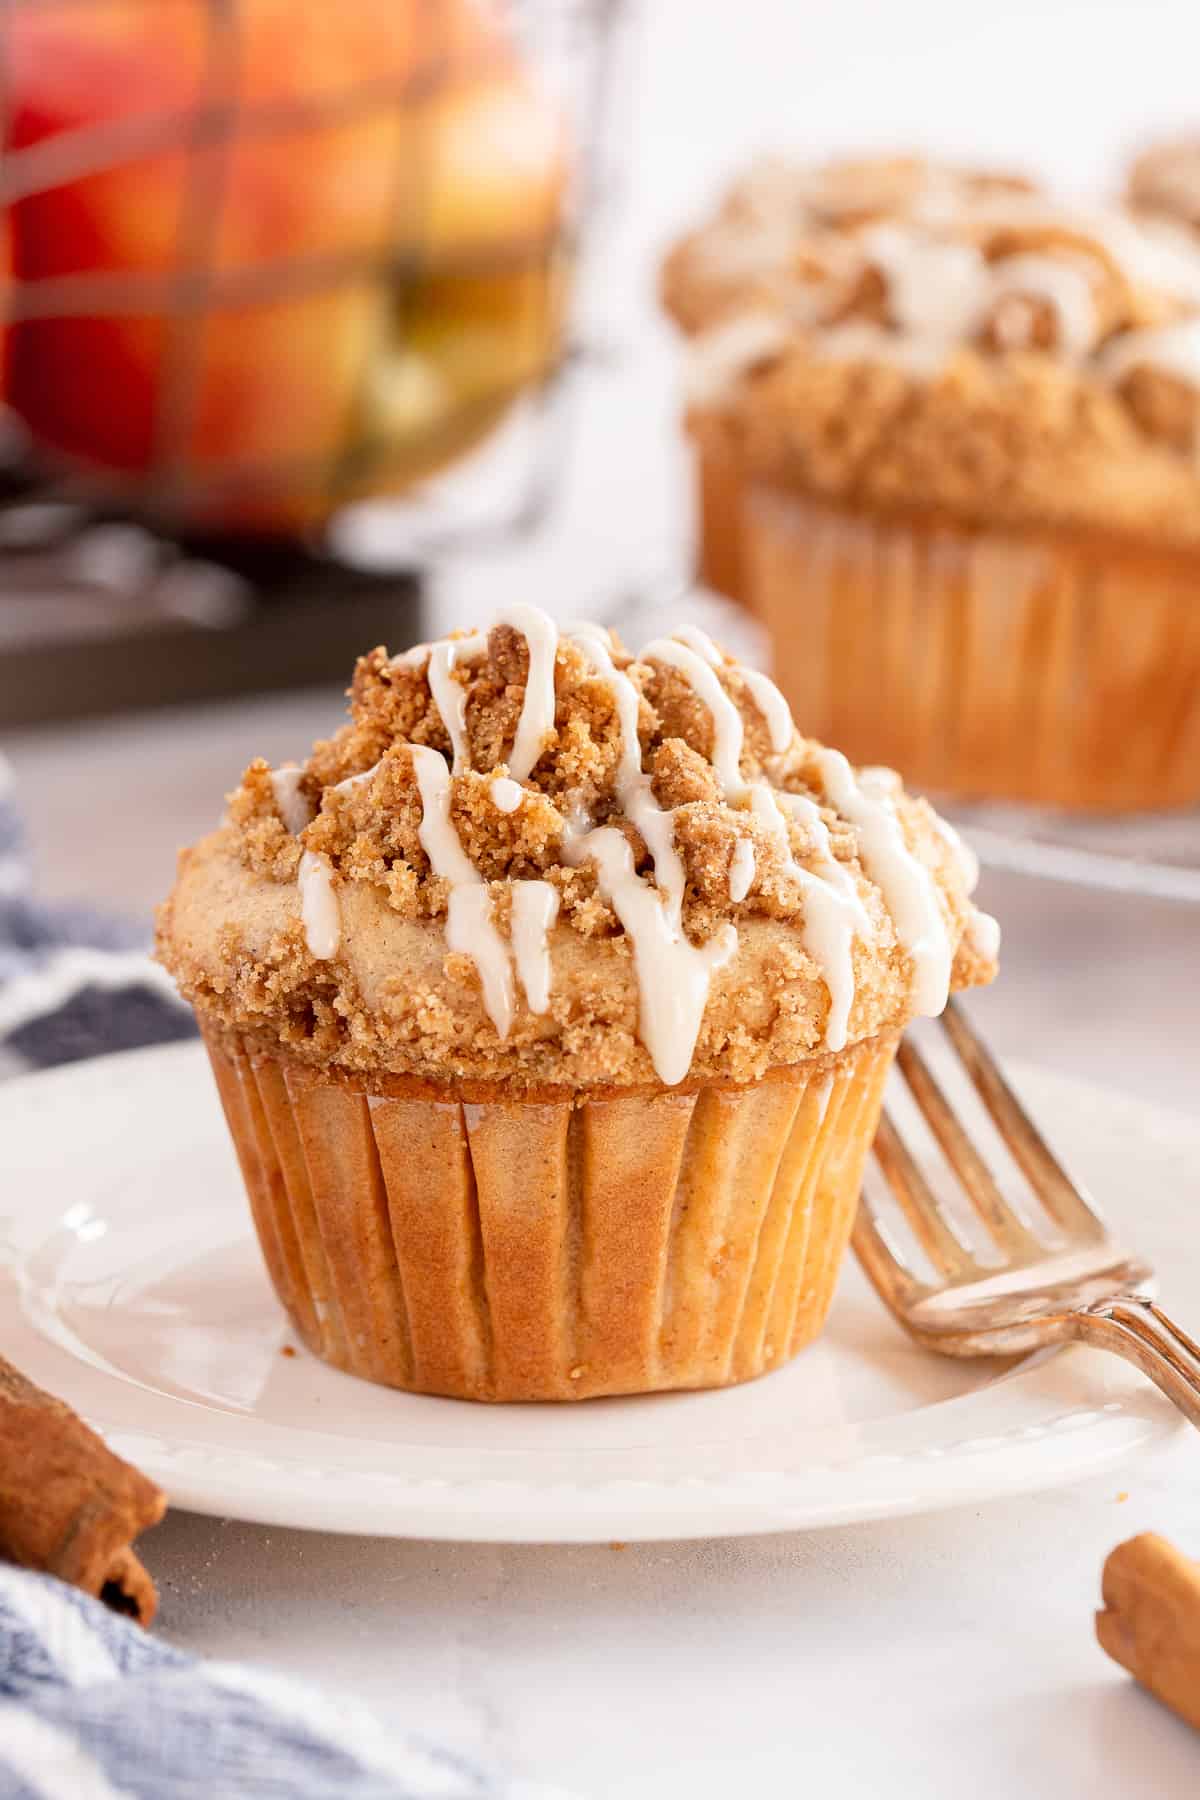 An apple muffin on a white plate in front of a crate of apples.